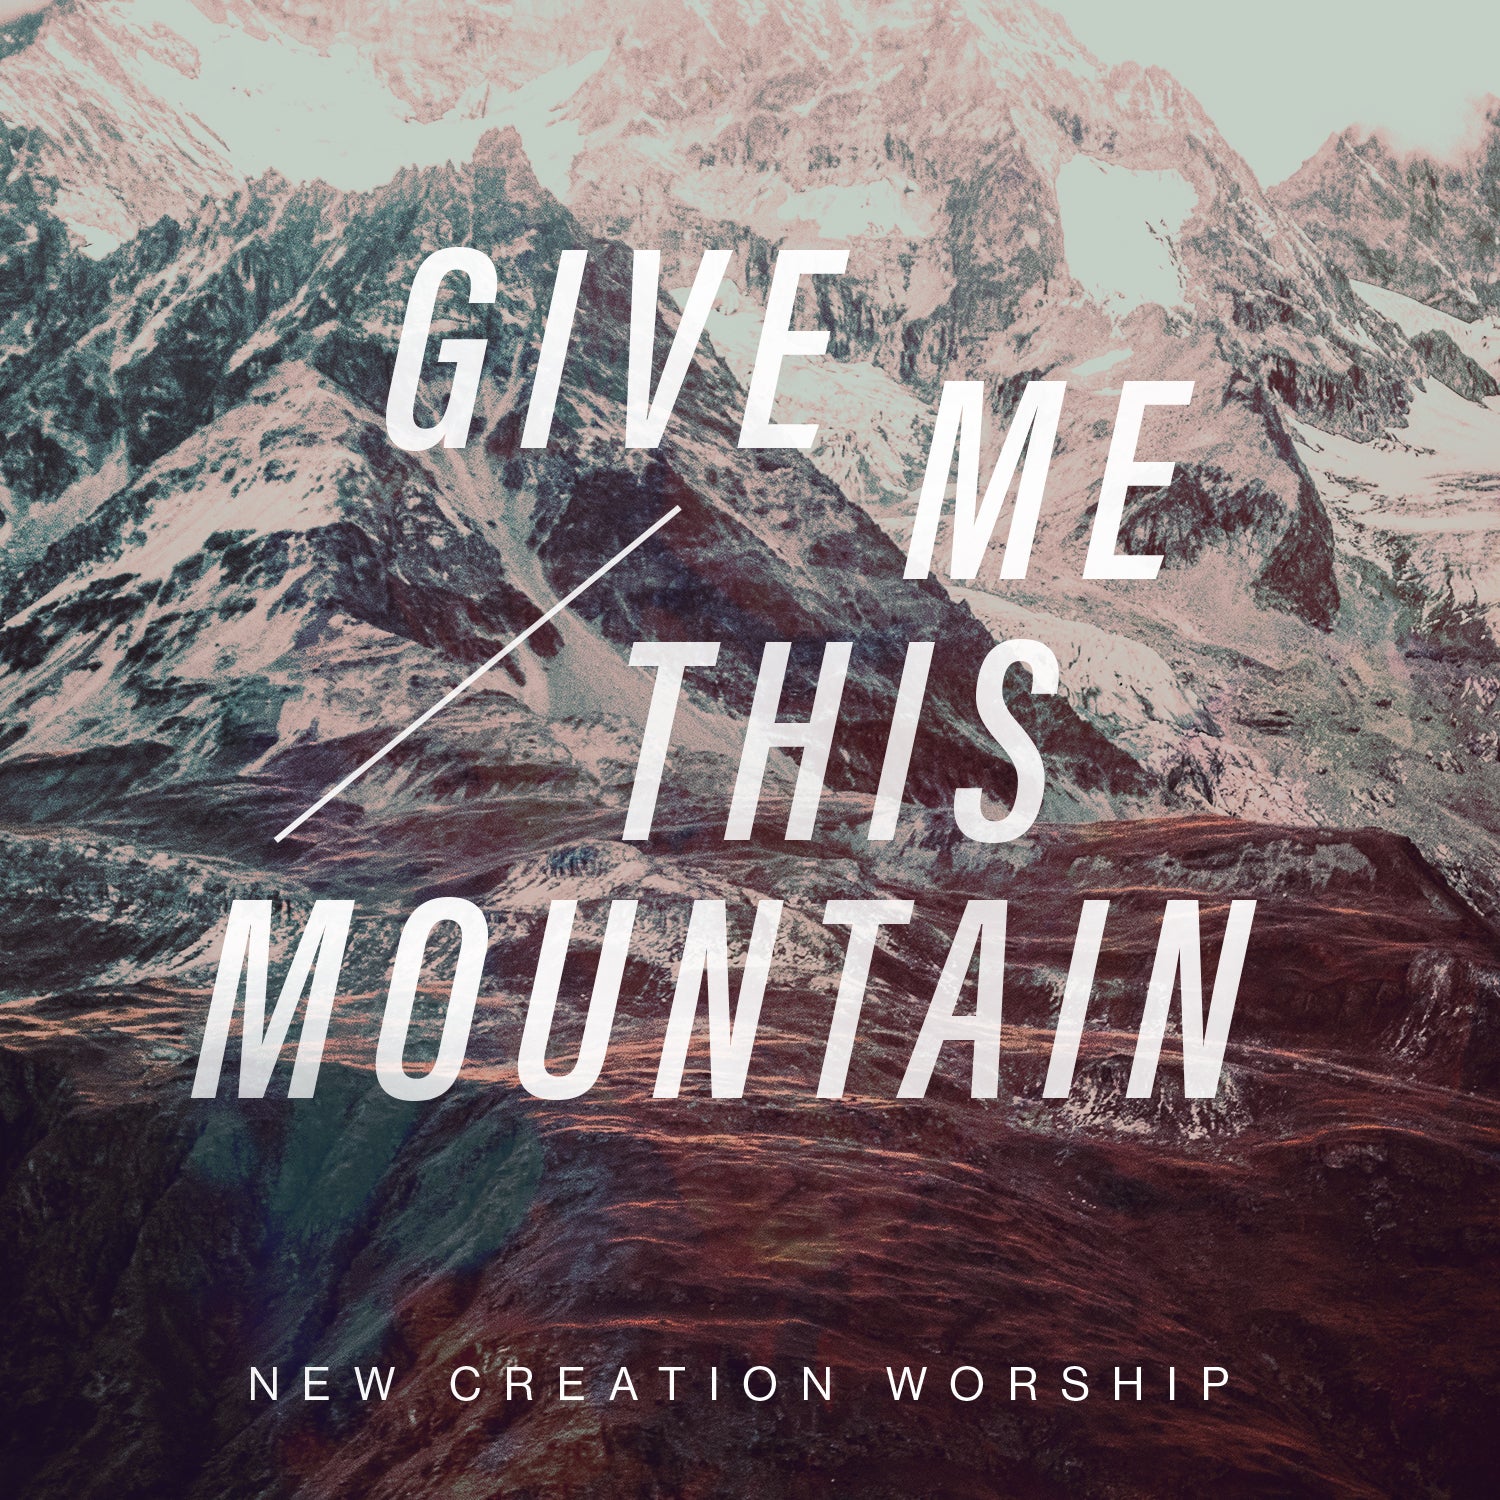 ROCKONLINE | New Creation Church | NCC | Joseph Prince | ROCK Bookshop | ROCK Bookstore | Star Vista | New Creation Worship | Give Me This Mountain | MP3 | English | Christian Worship | Praise & Worship | Free delivery for Singapore orders above $50.